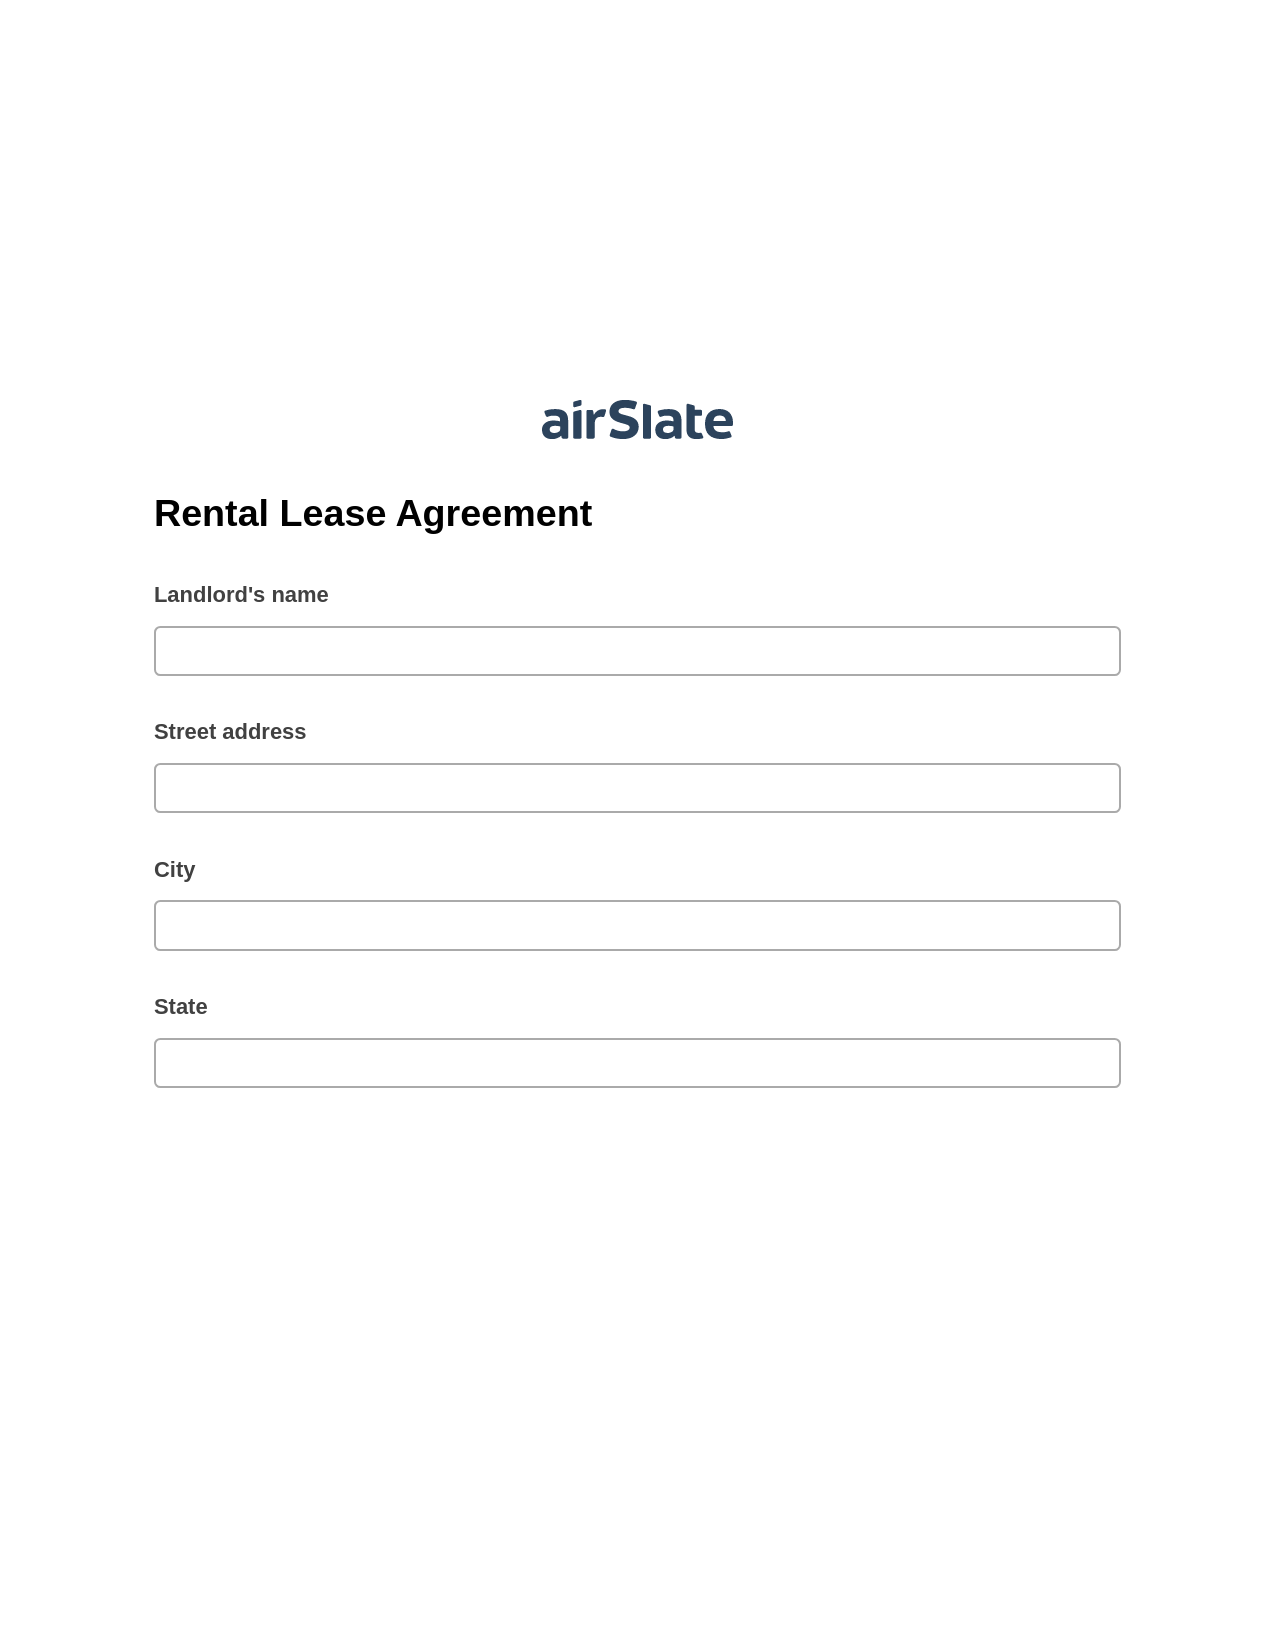 Rental Lease Agreement Pre-fill from Litmos bot, Pre-fill with Custom Data Bot, Archive to SharePoint Folder Bot